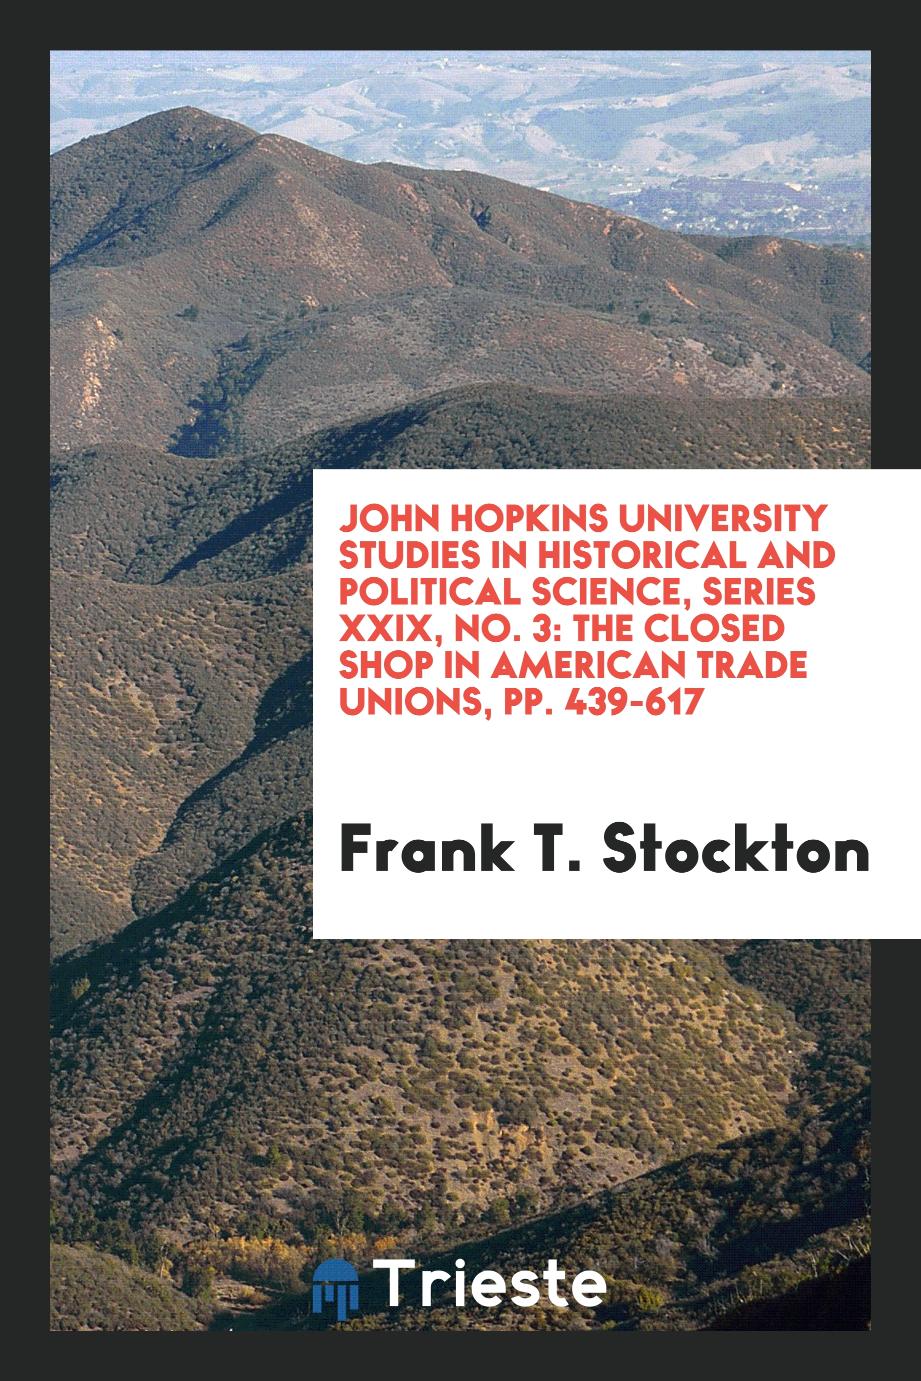 John Hopkins university studies in historical and political science, series XXIX, No. 3: The closed shop in American trade unions, pp. 439-617